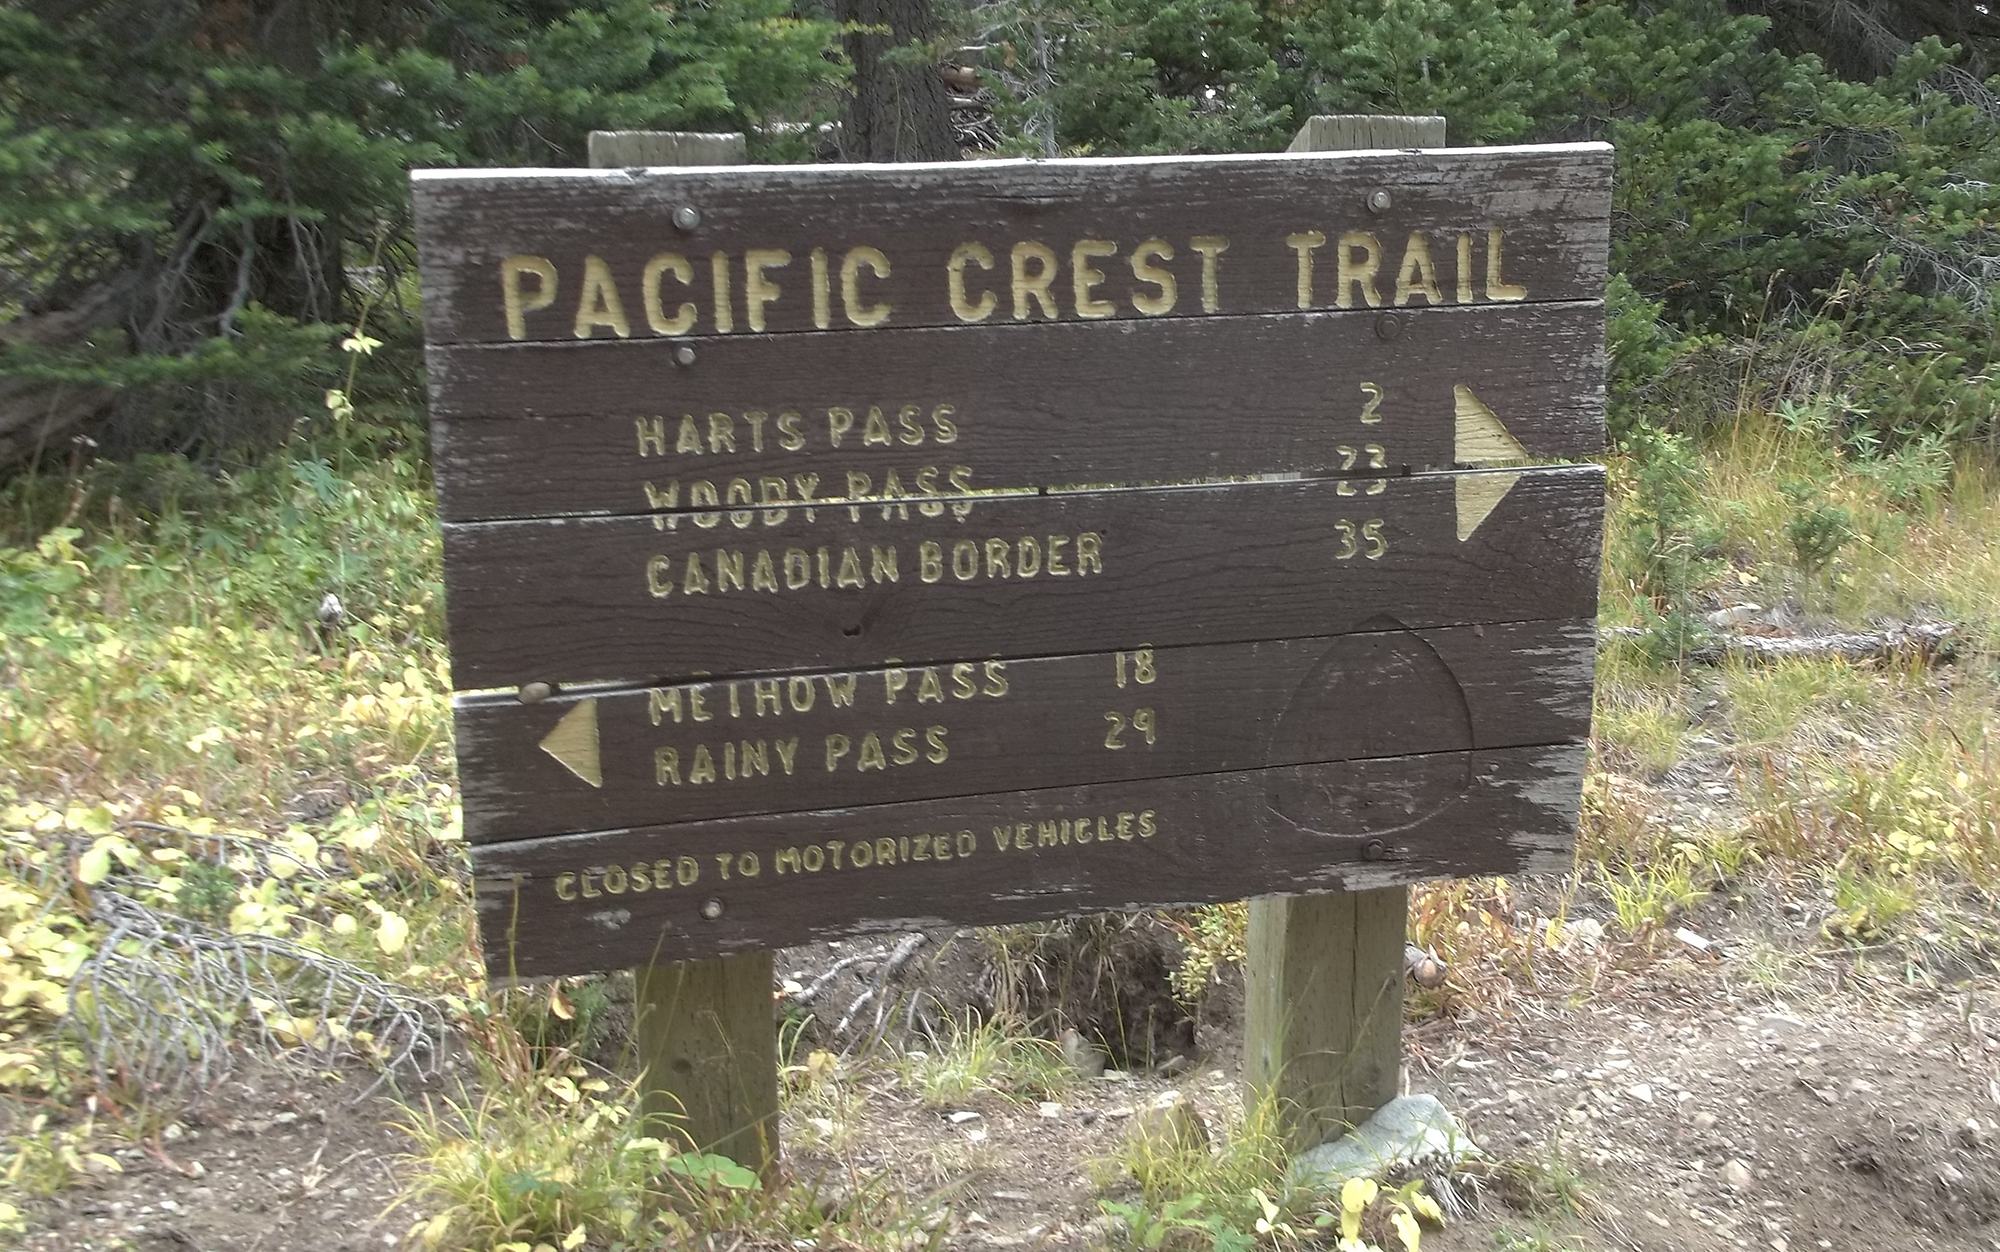 All good things come to an end—even a 2,600-mile Pacific Crest Trail thru-hike.